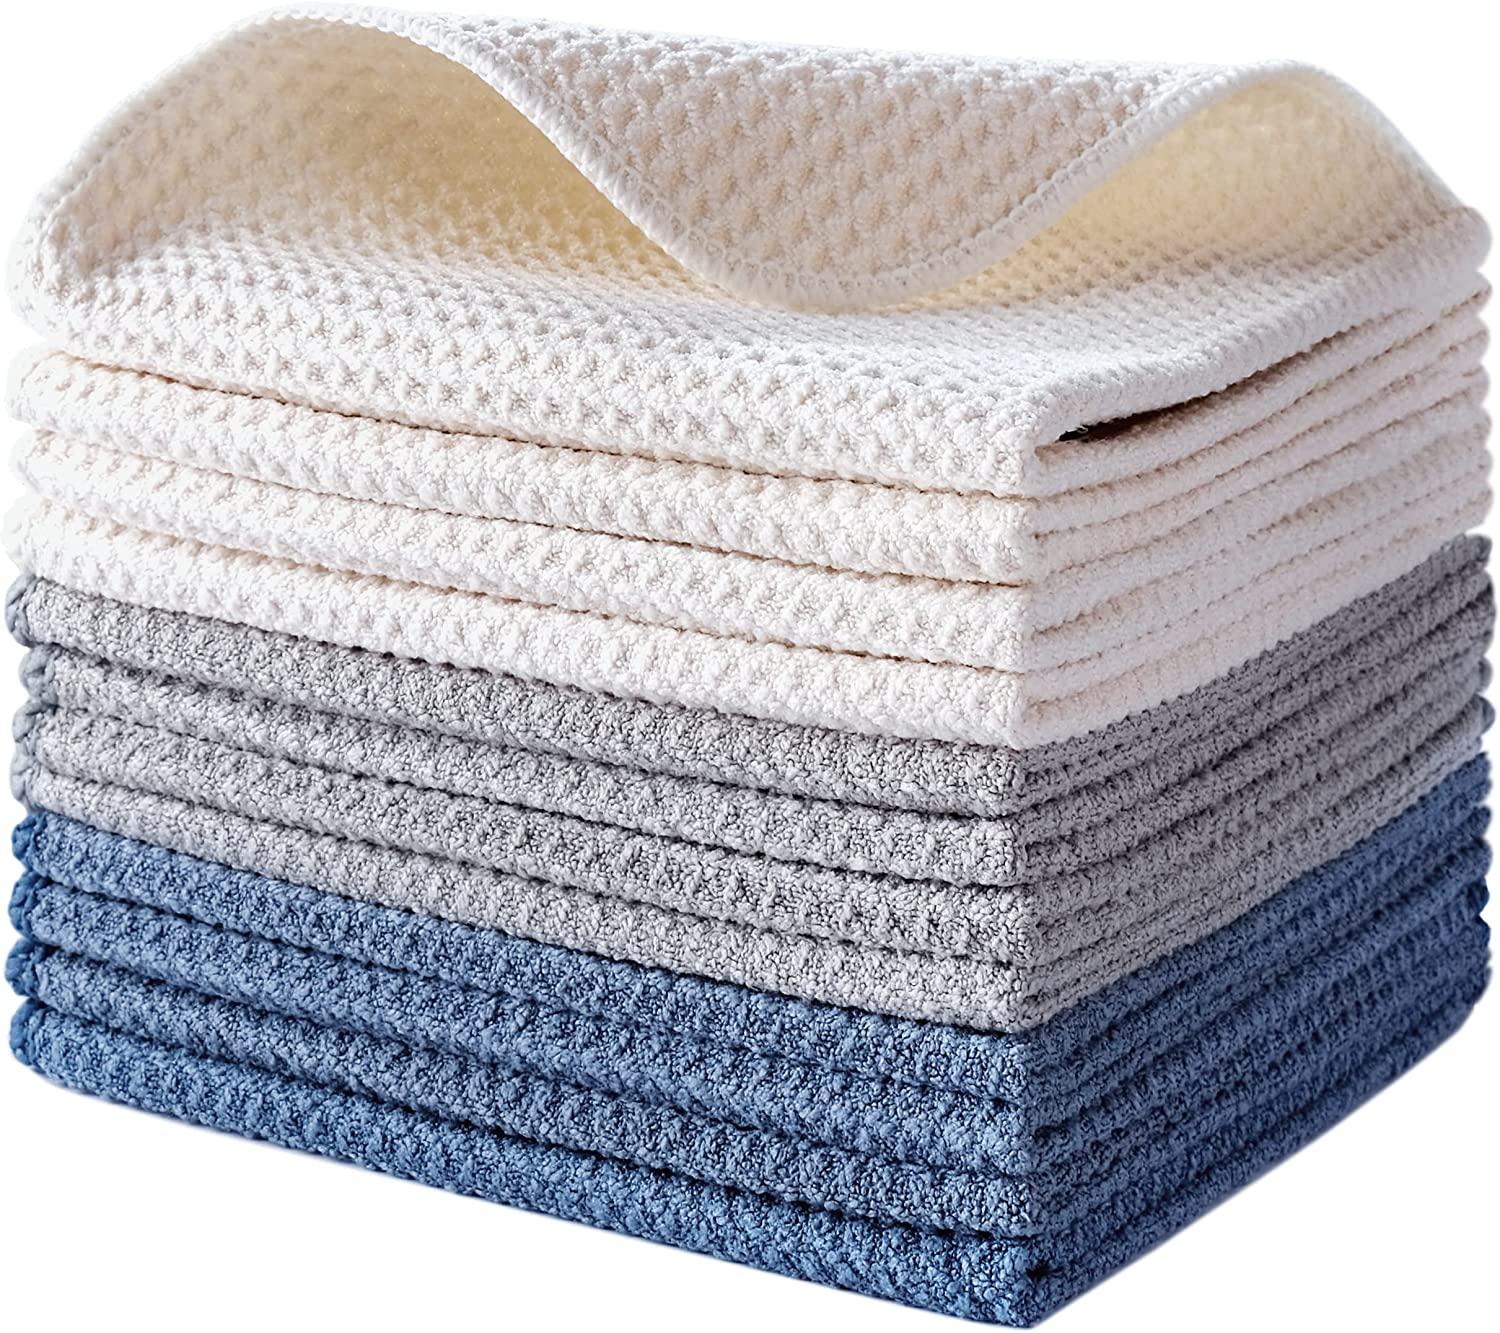  Polyte Premium Microfiber Kitchen Dish Wash and Scrub Mesh  Cloth, 12 x 12 in, 6 Pack (Light Blue, Gray, Teal) : Health & Household